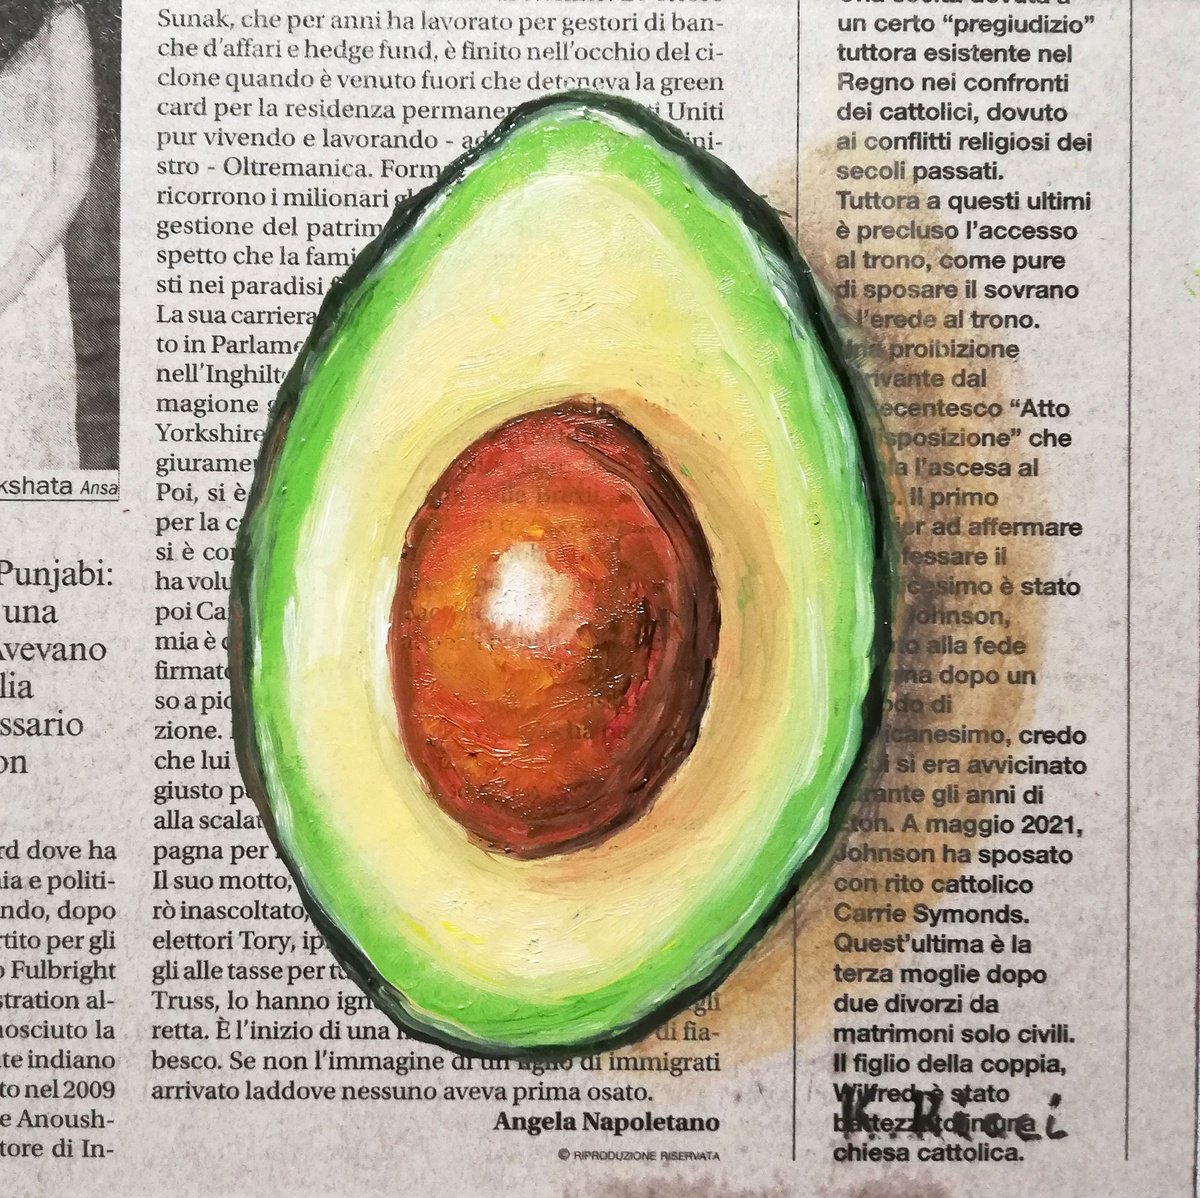 Avocado on Newspaper Original Oil on Wooden Board Painting 6 by 6 inches (15x15 cm) by Katia Ricci